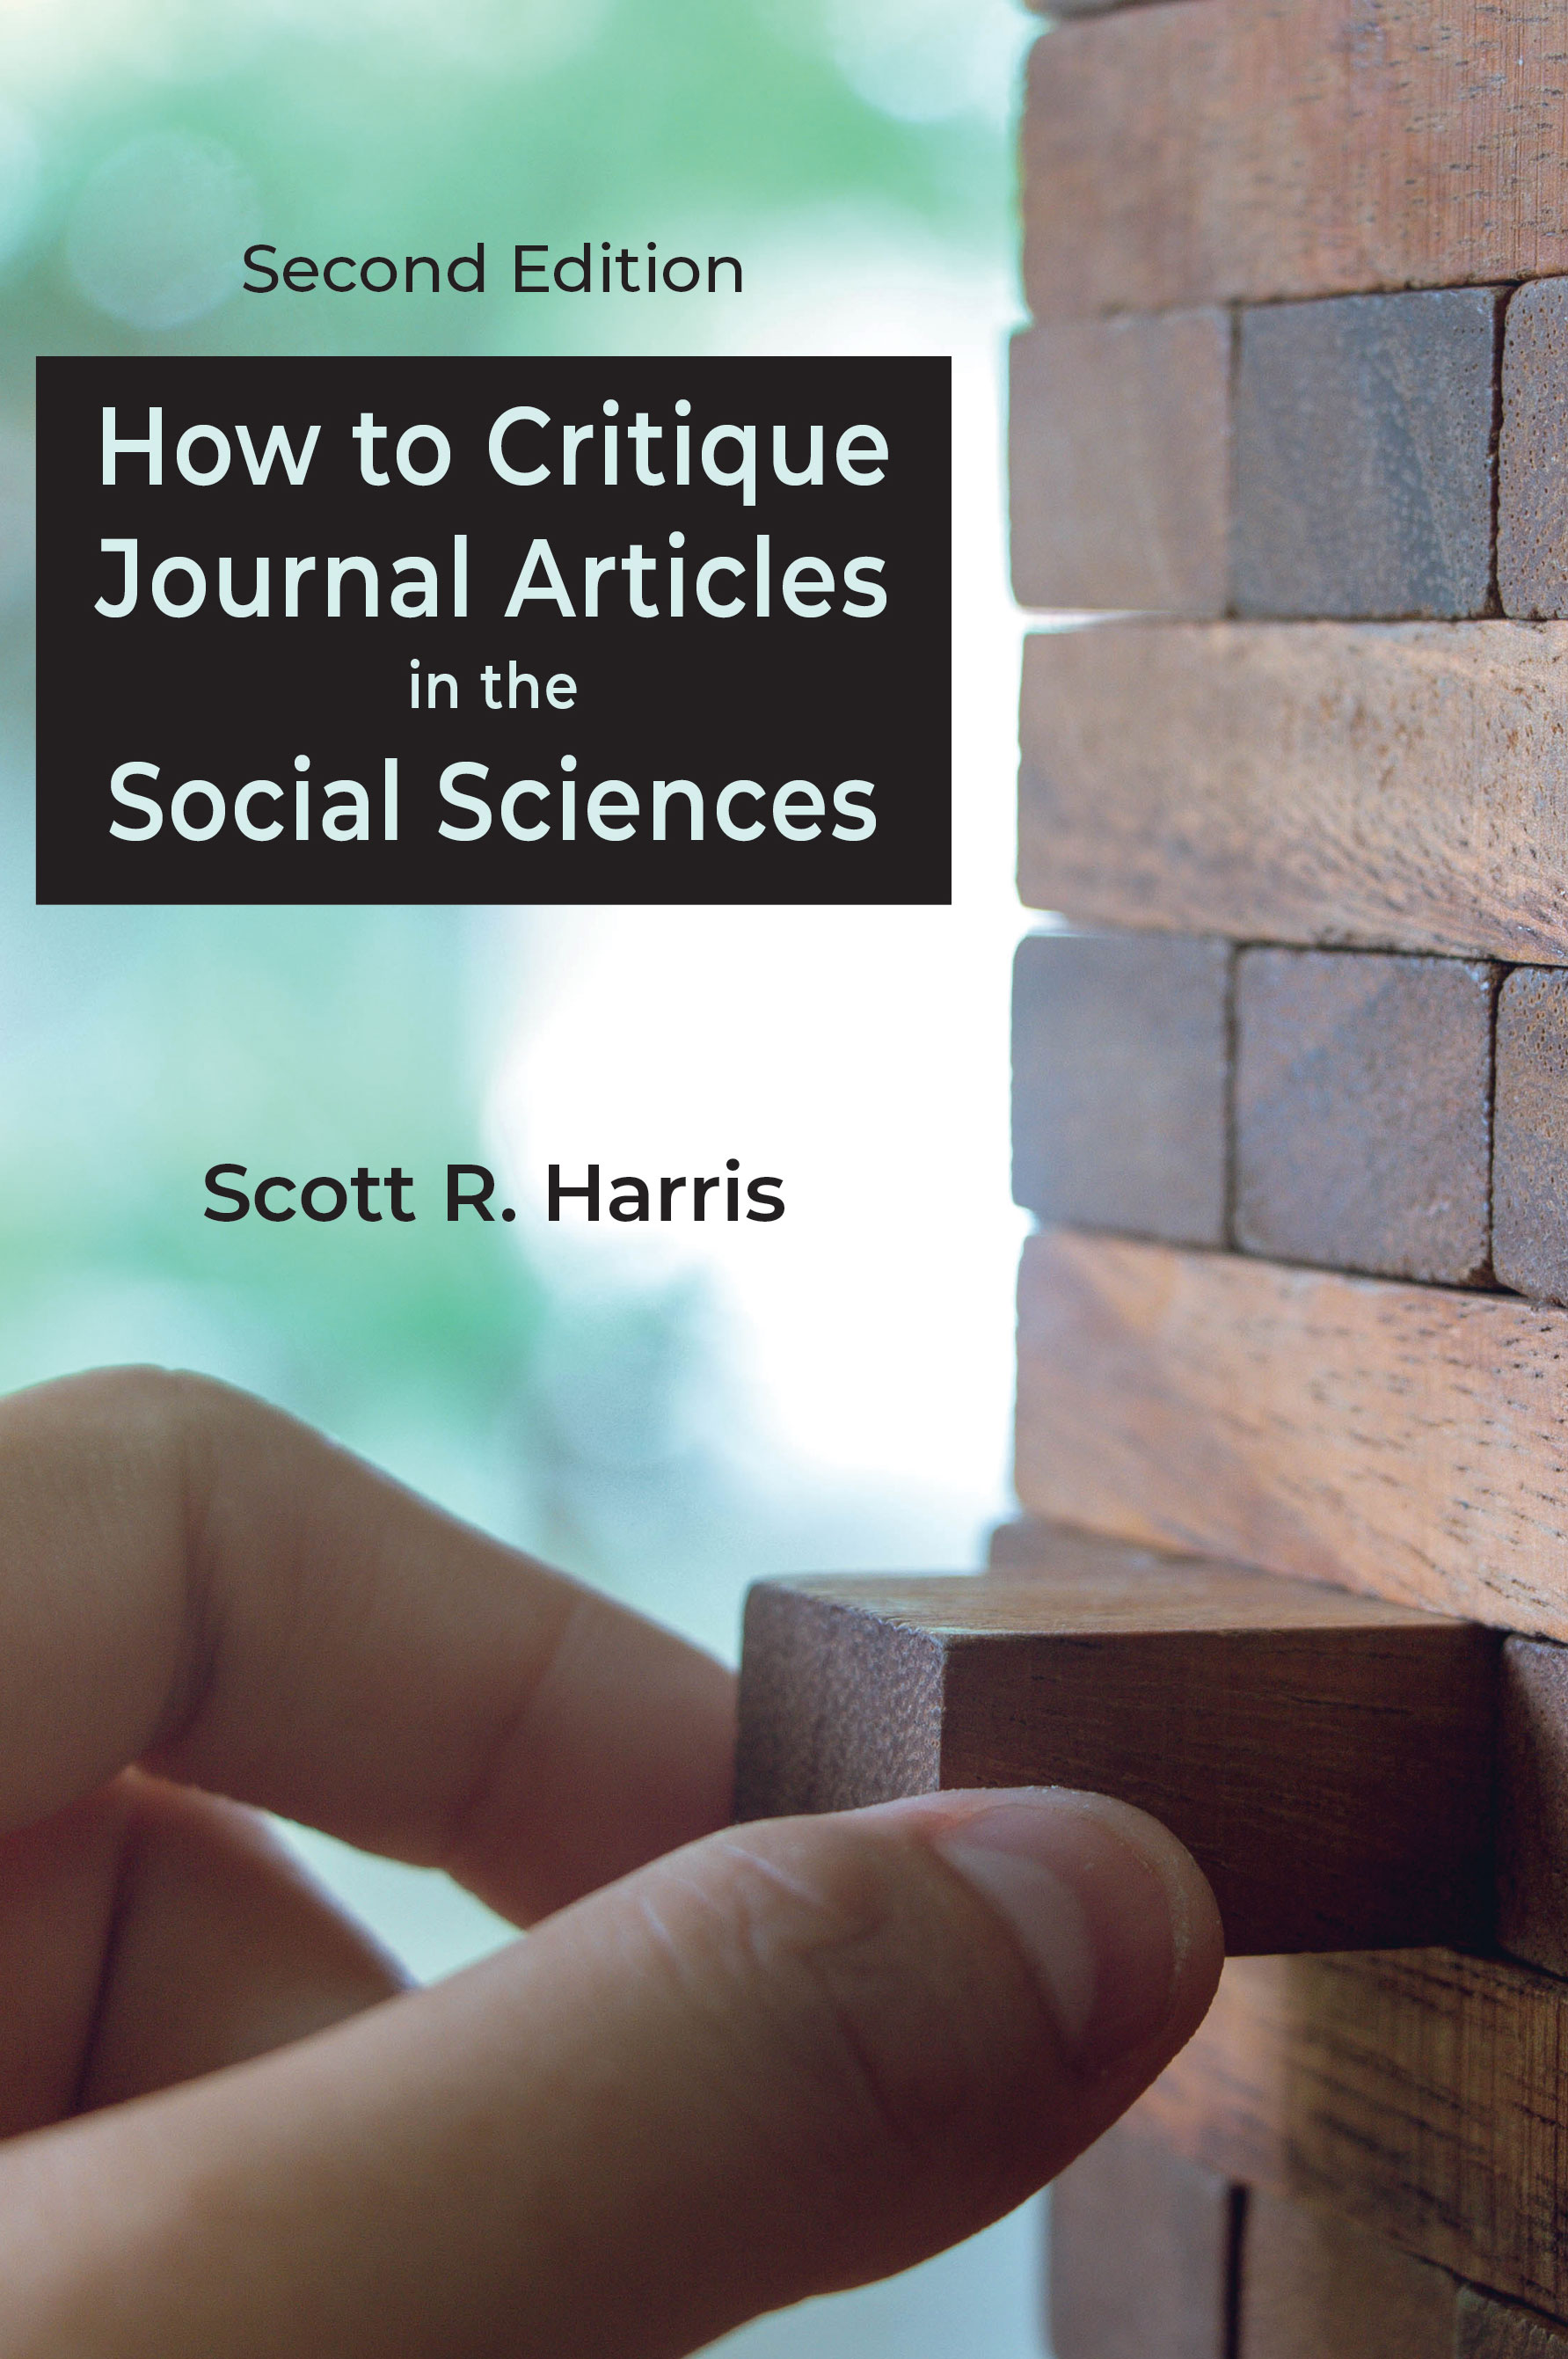 How to Critique Journal Articles in the Social Sciences:  by Scott R. Harris